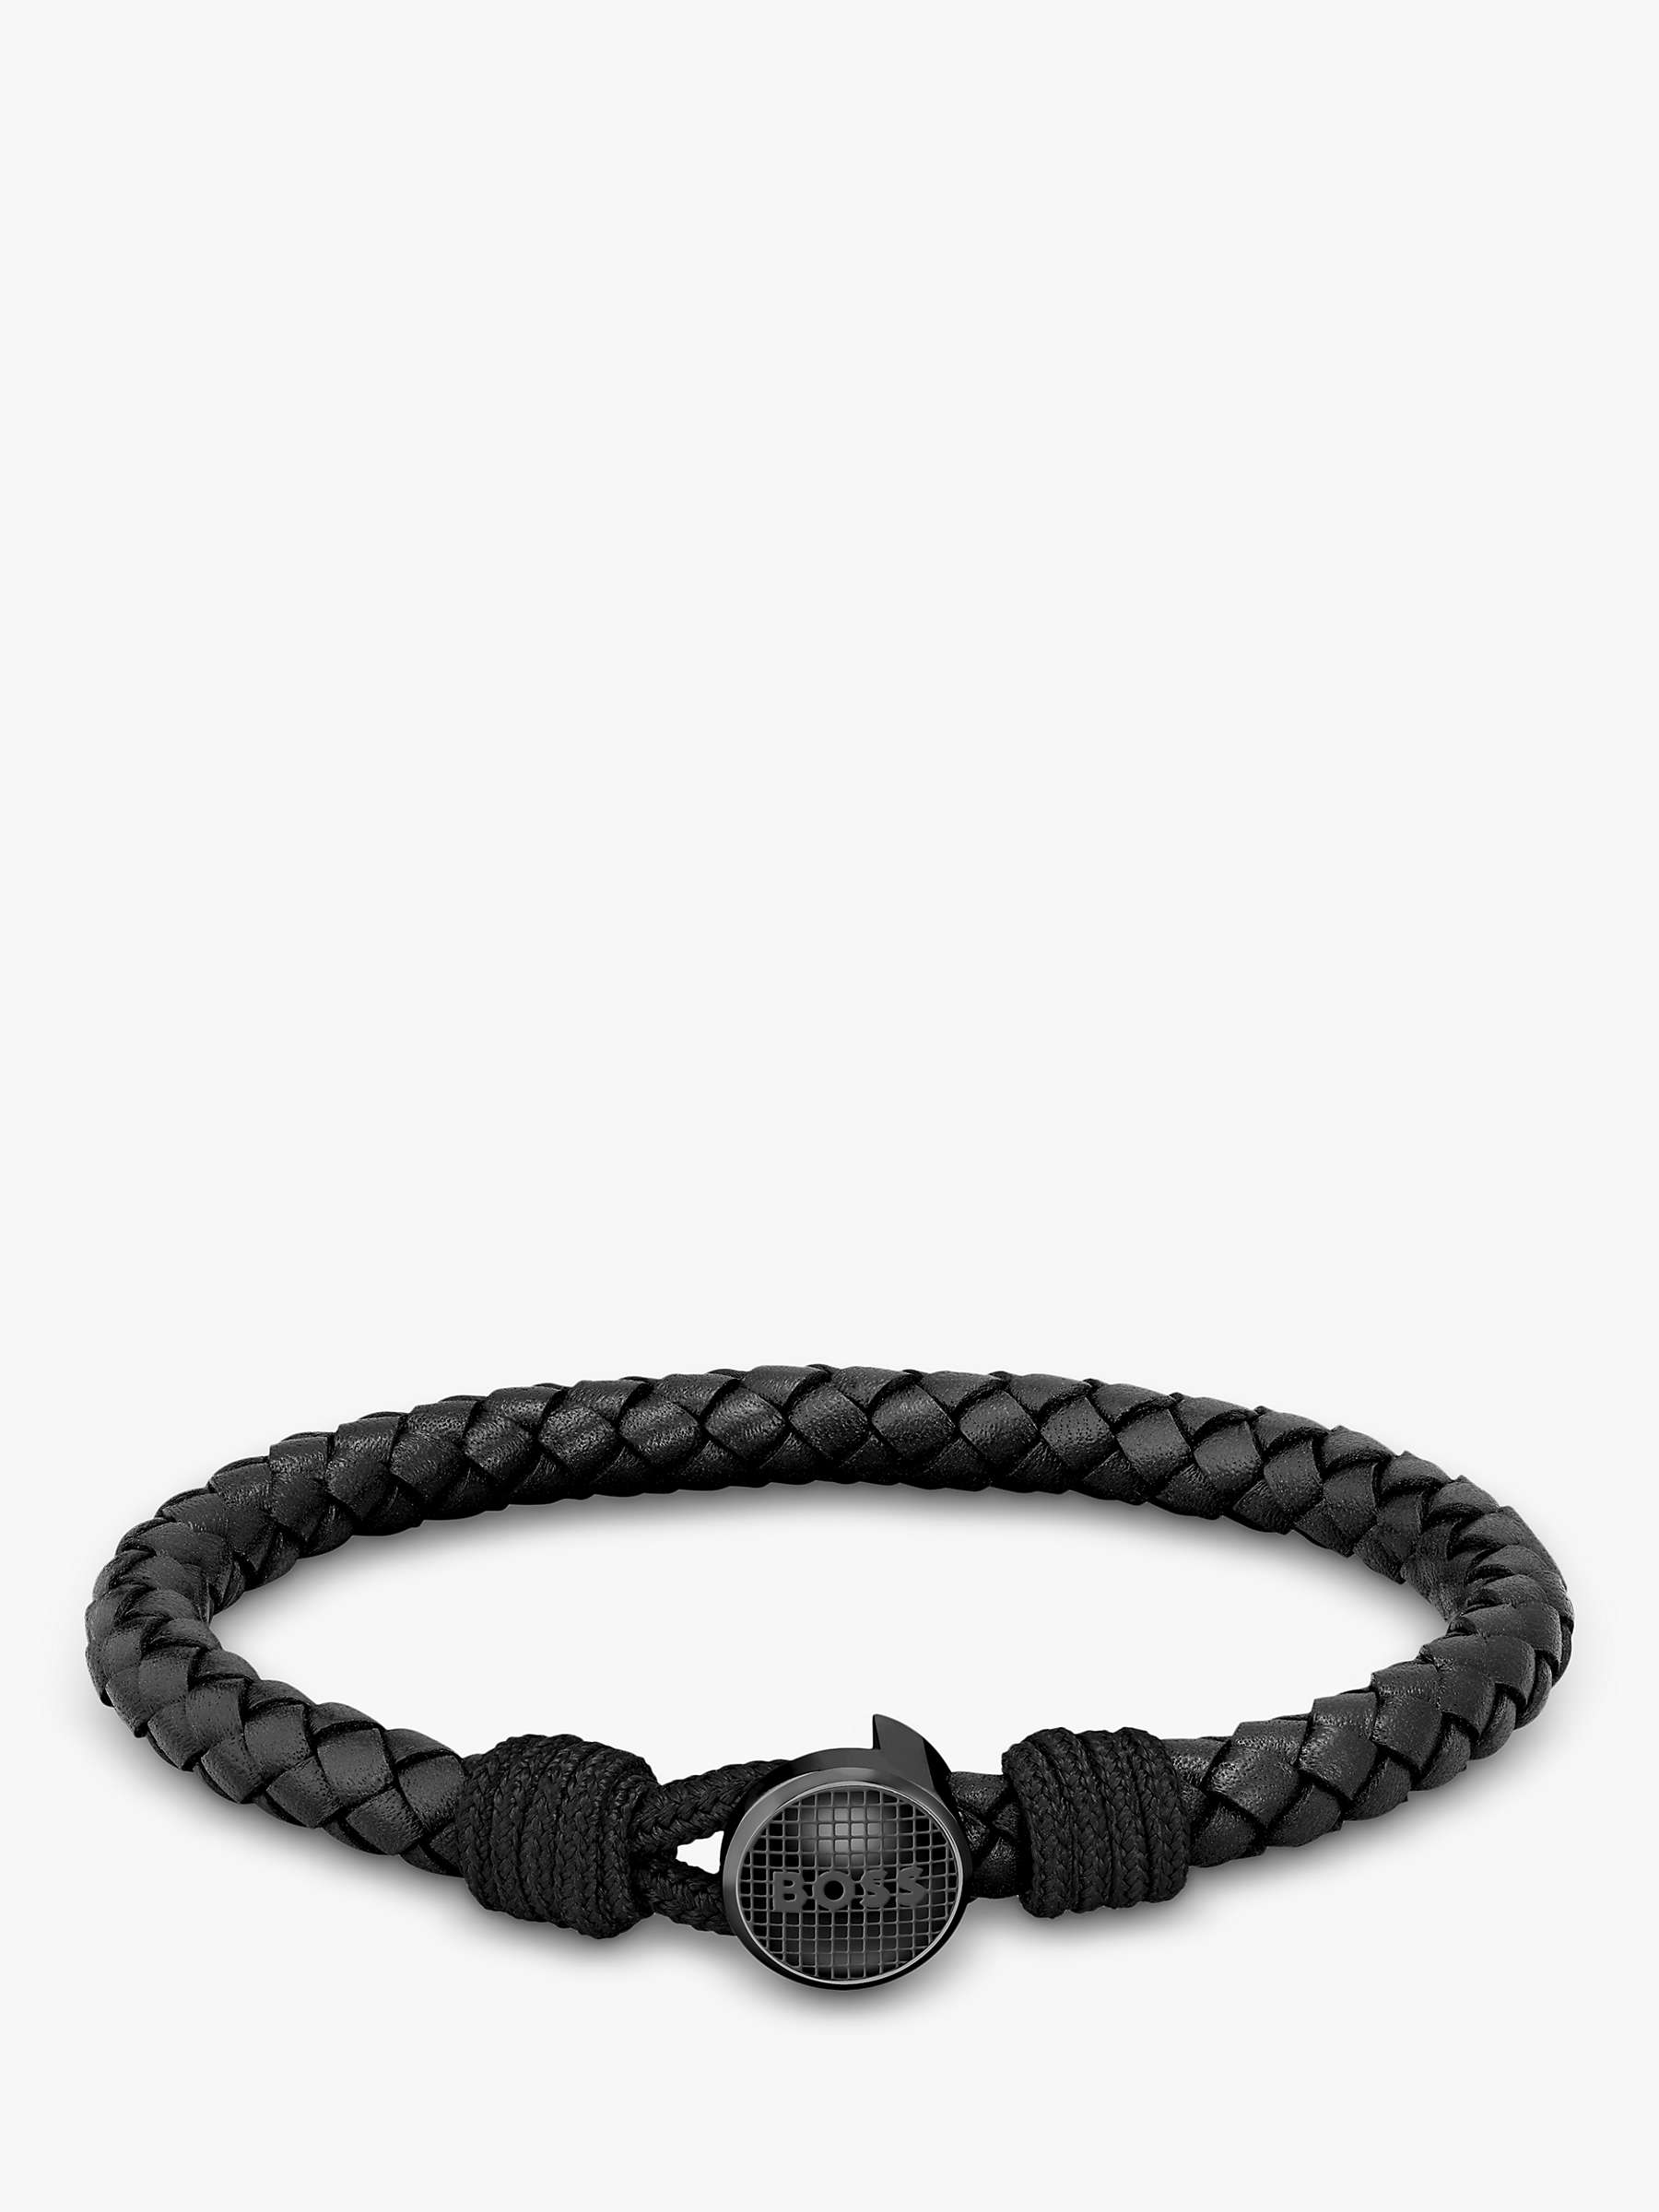 Buy BOSS Men's Thad Classic Collection Logo Braided Leather Bracelet, Black Online at johnlewis.com